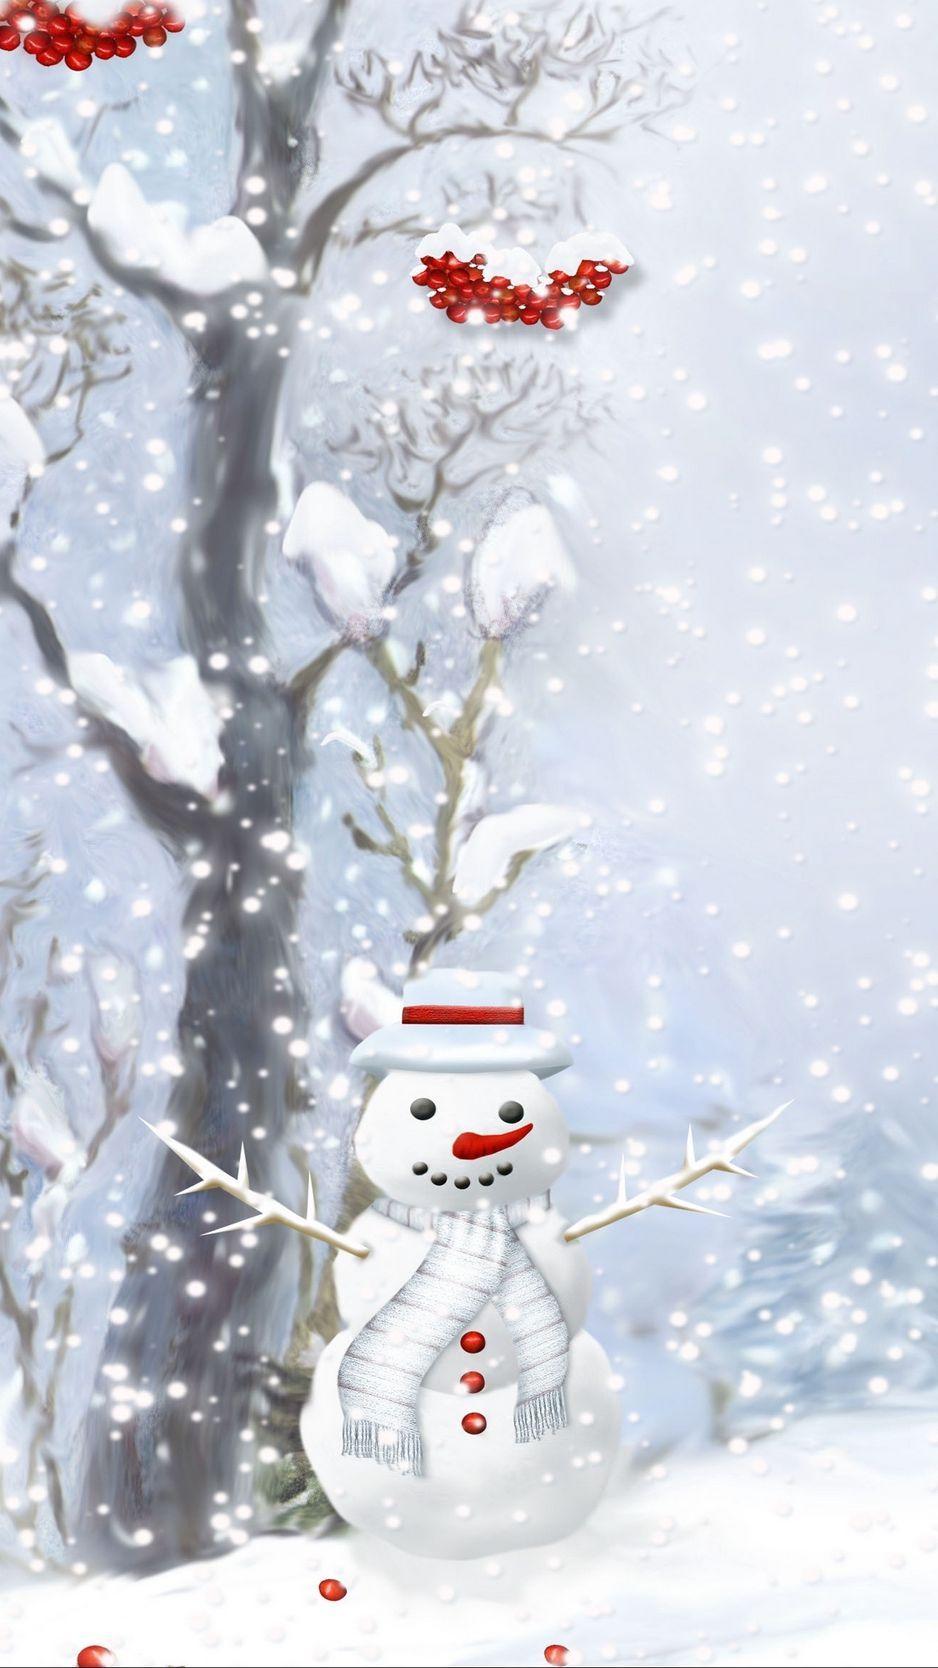 Snowman Iphone Wallpapers Top Free Snowman Iphone Backgrounds Wallpaperaccess